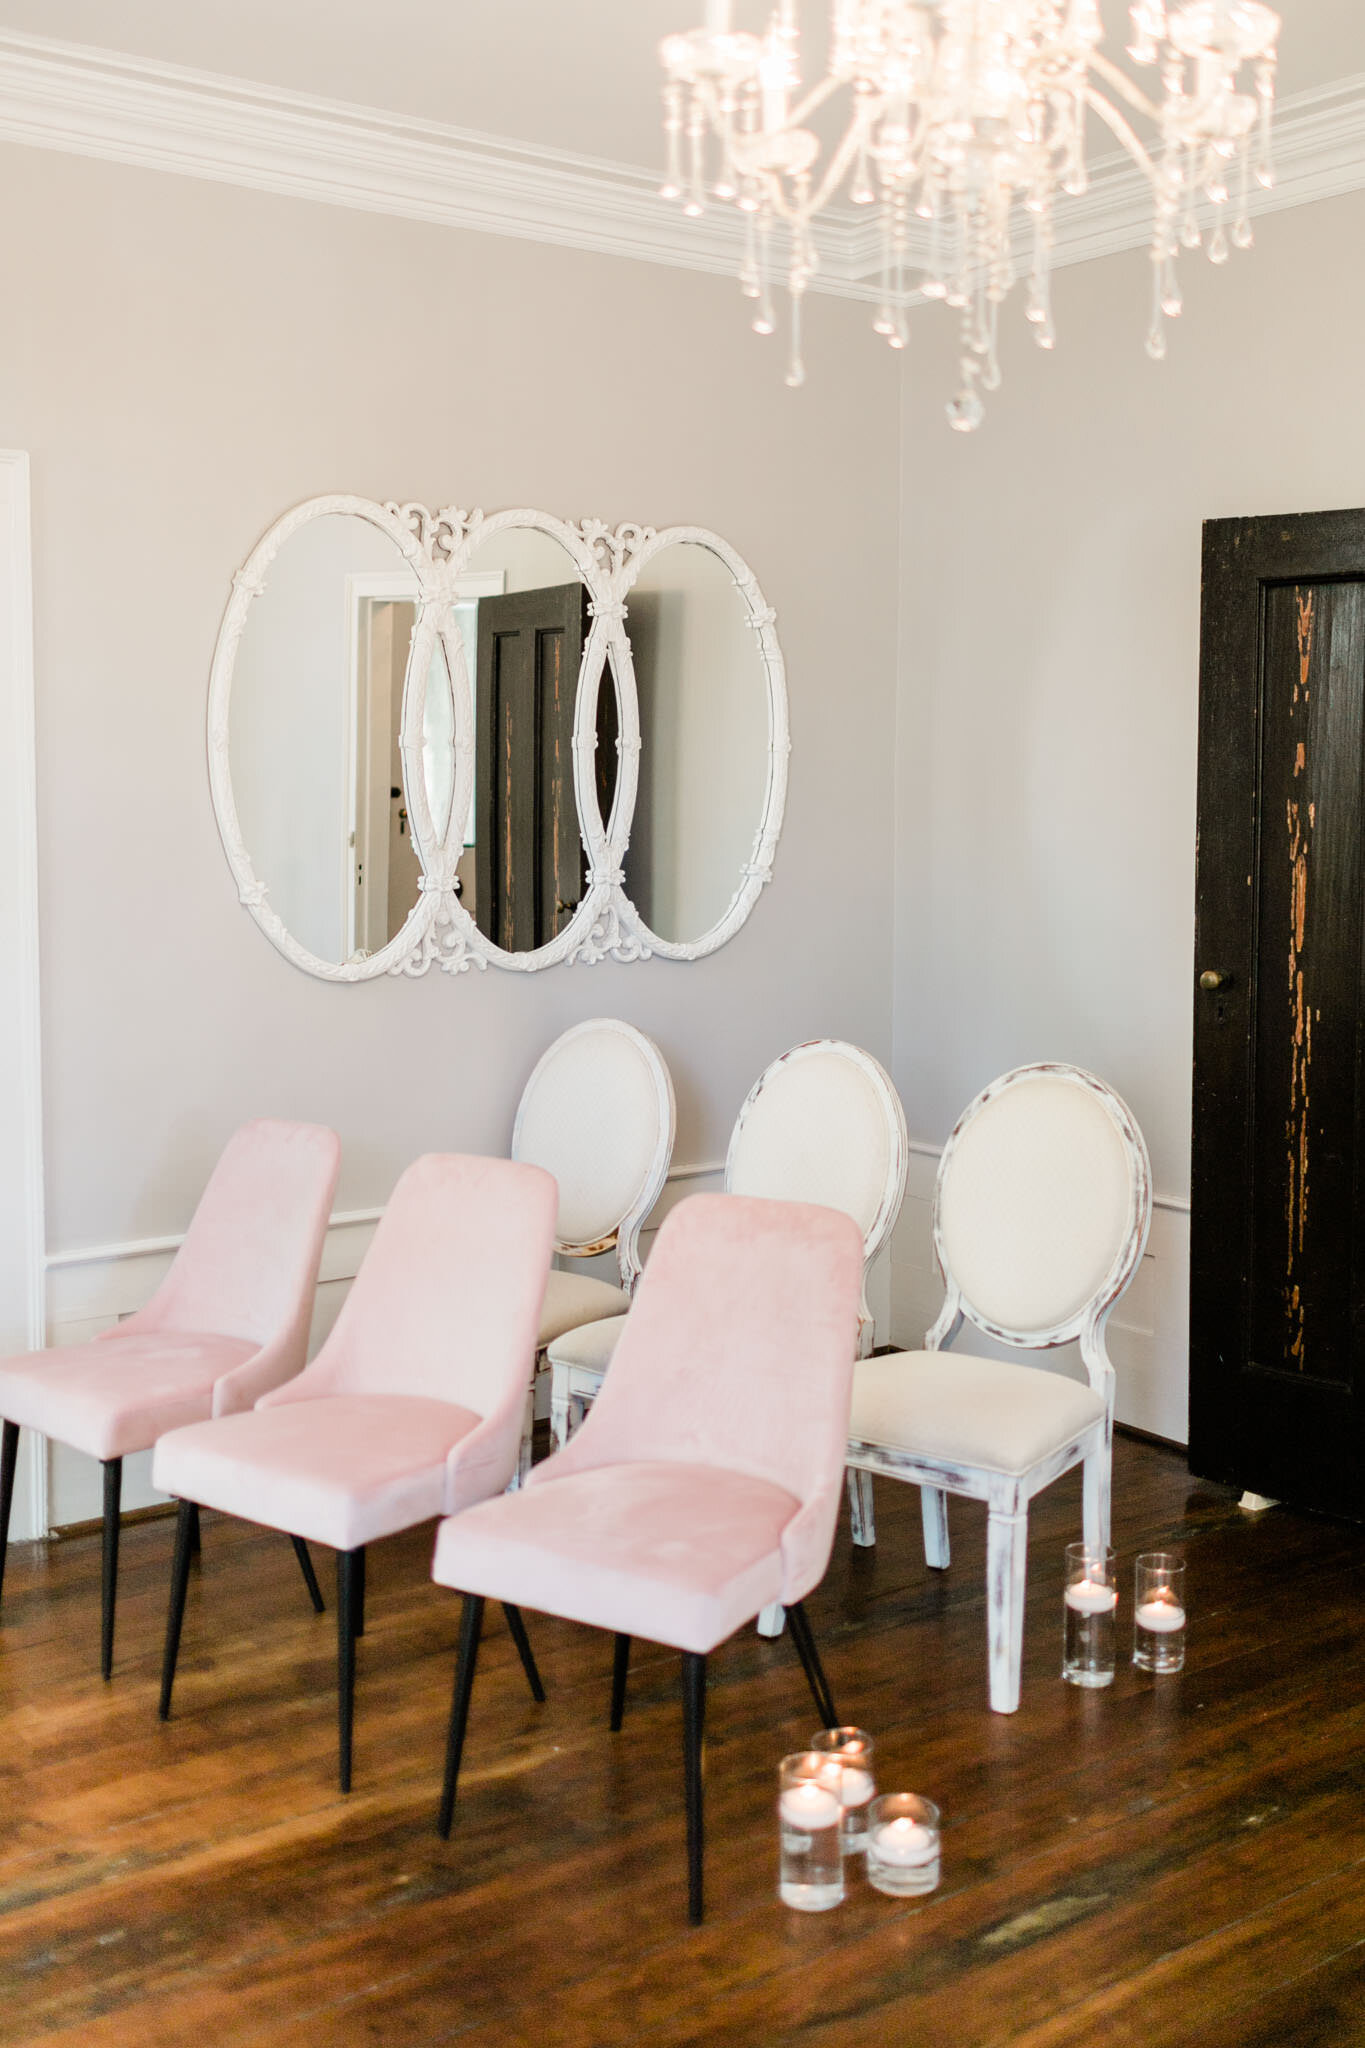 Durham Wedding Photographer | By G. Lin Photography | Shabby chic pink and white wedding chairs